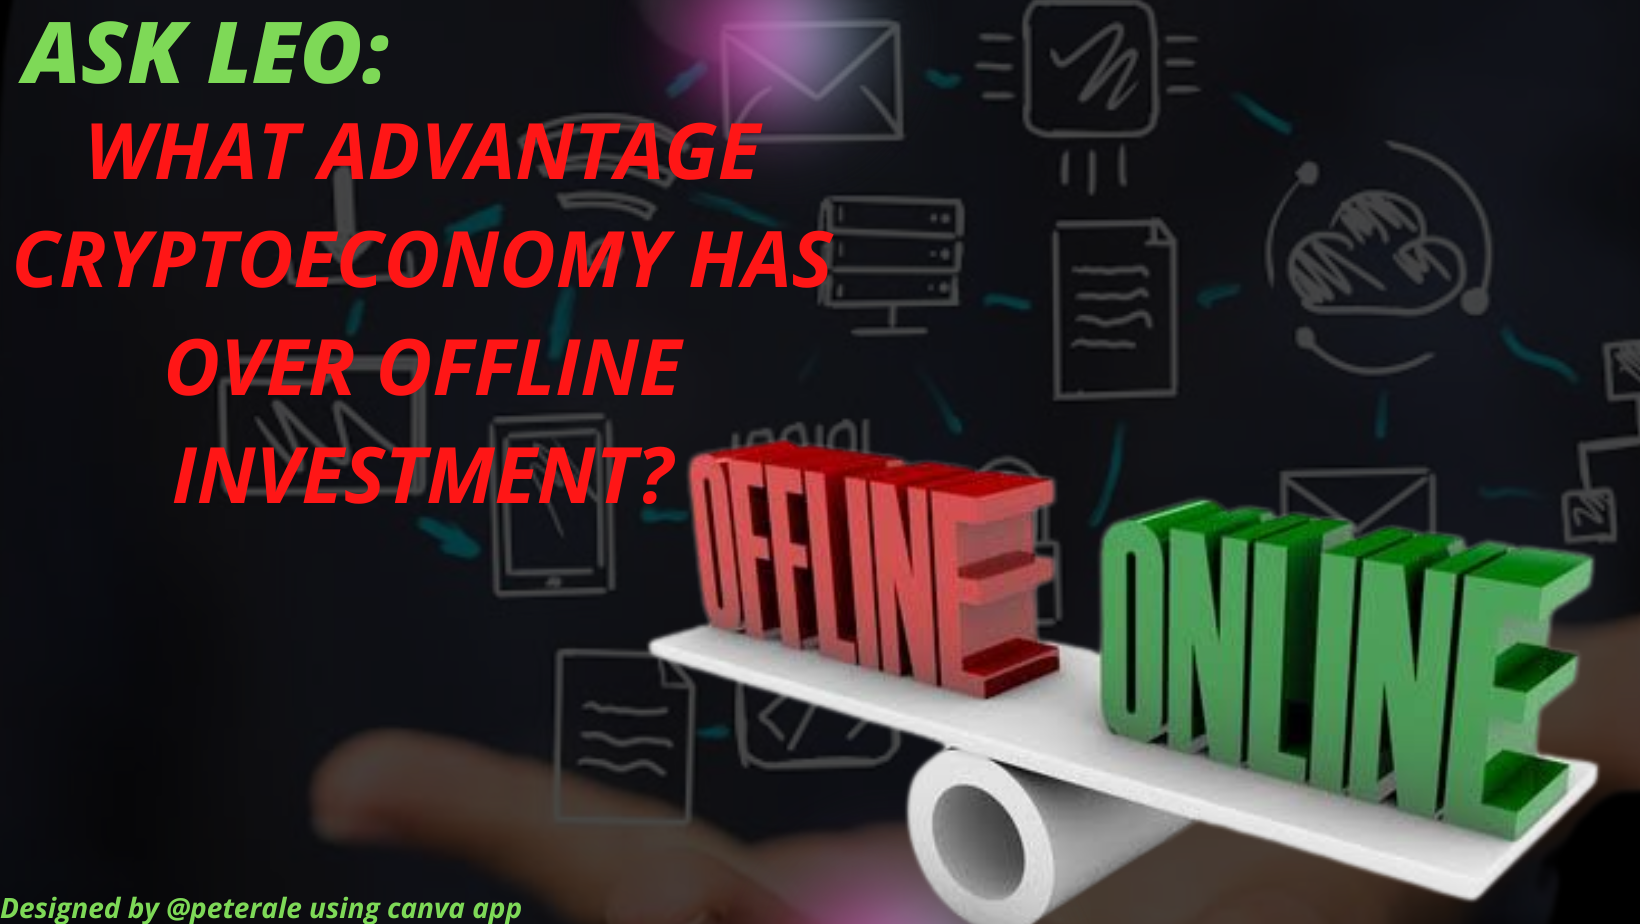 @peterale/ask-leo-what-advantage-cryptoeconomy-has-over-offline-investment